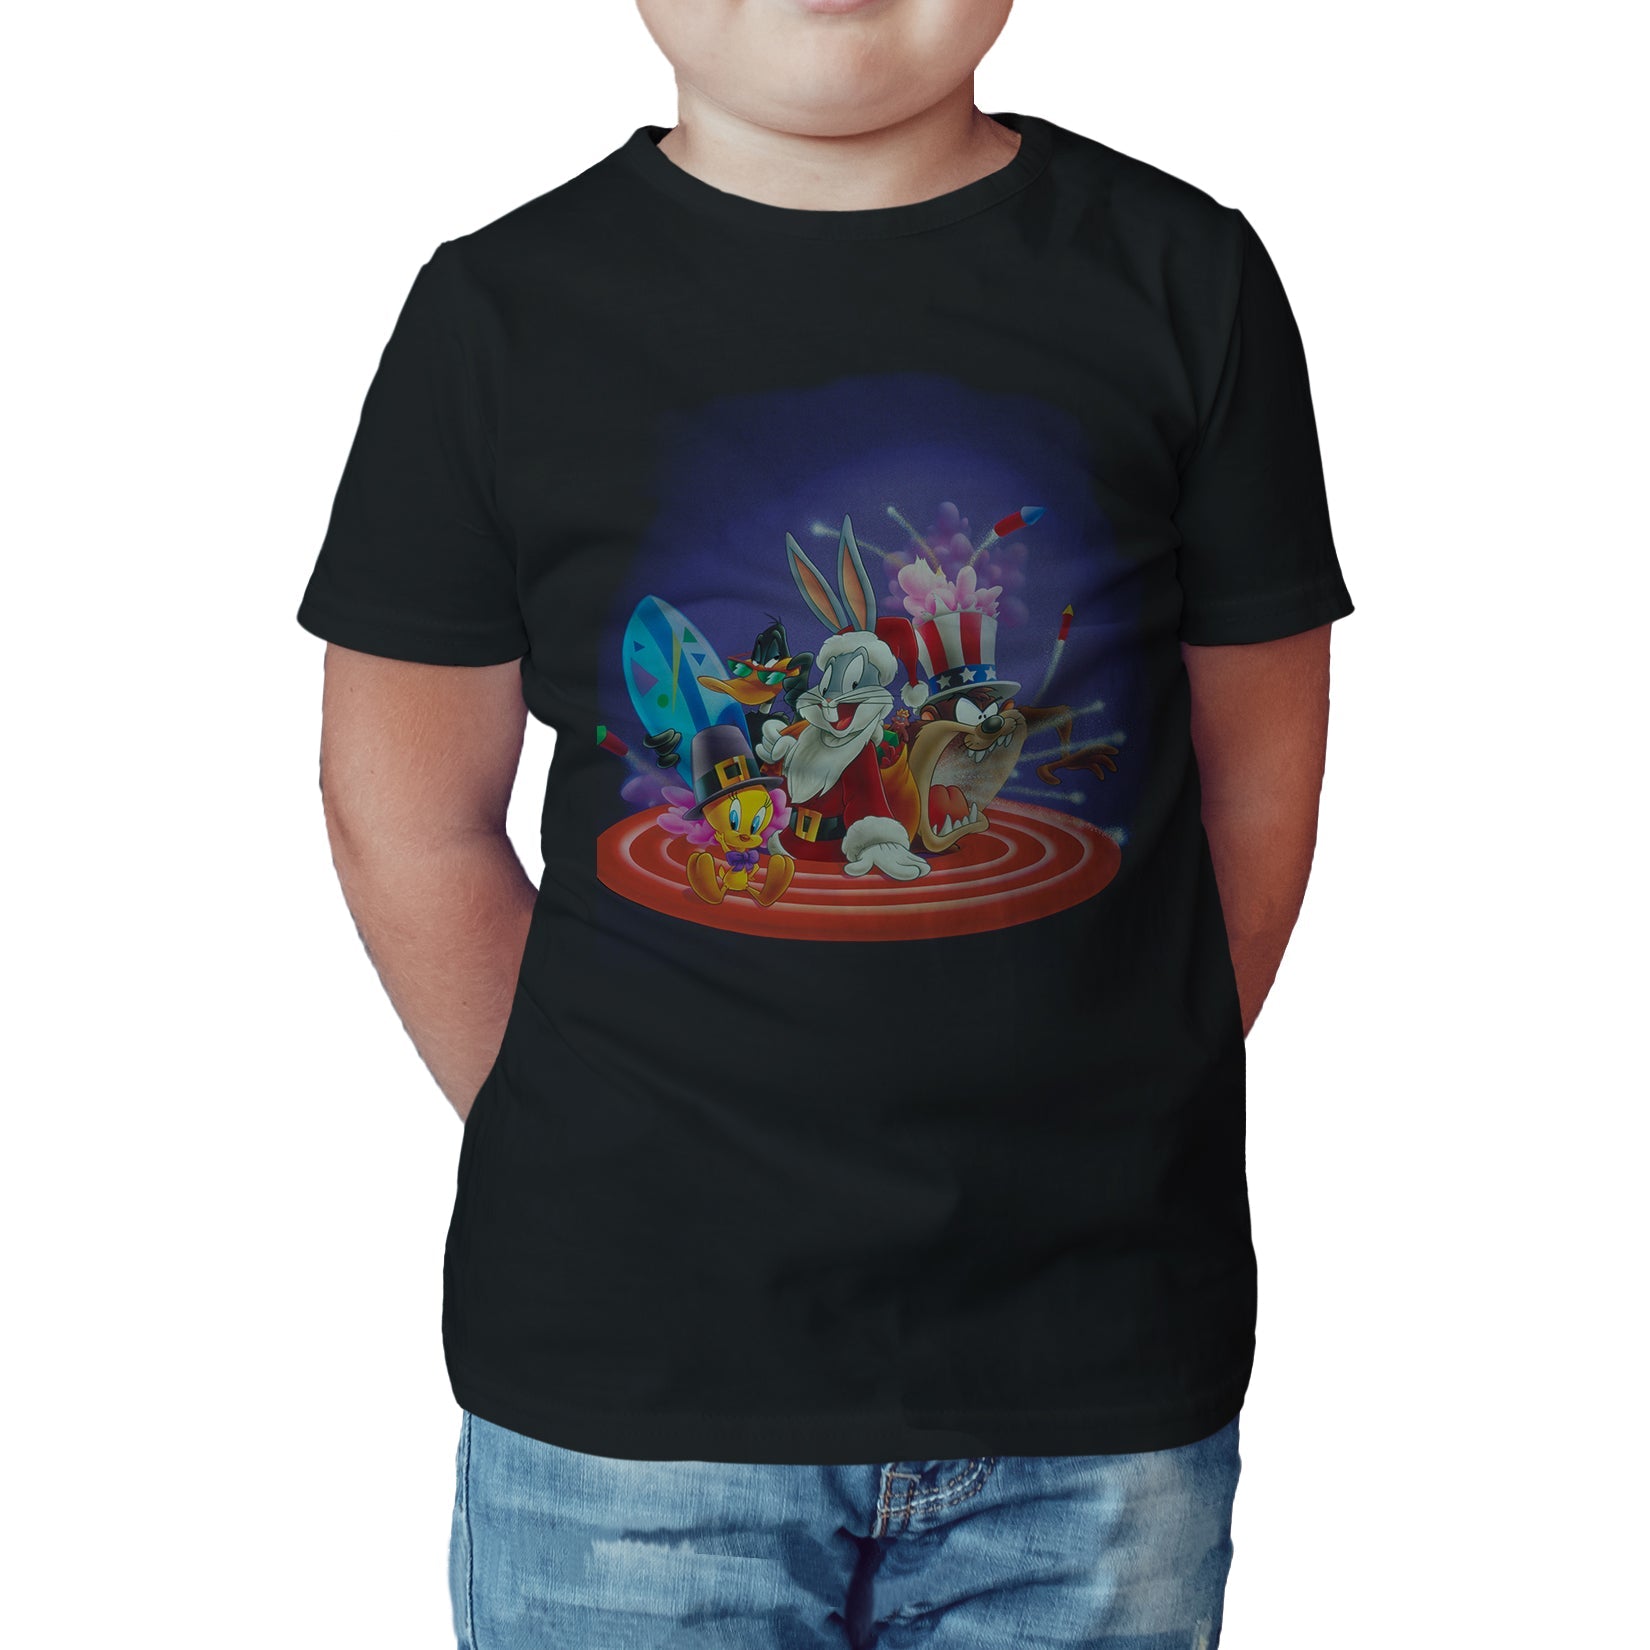 Looney Tunes Tooney Tunes American Holiday Official Kid's T-Shirt ()